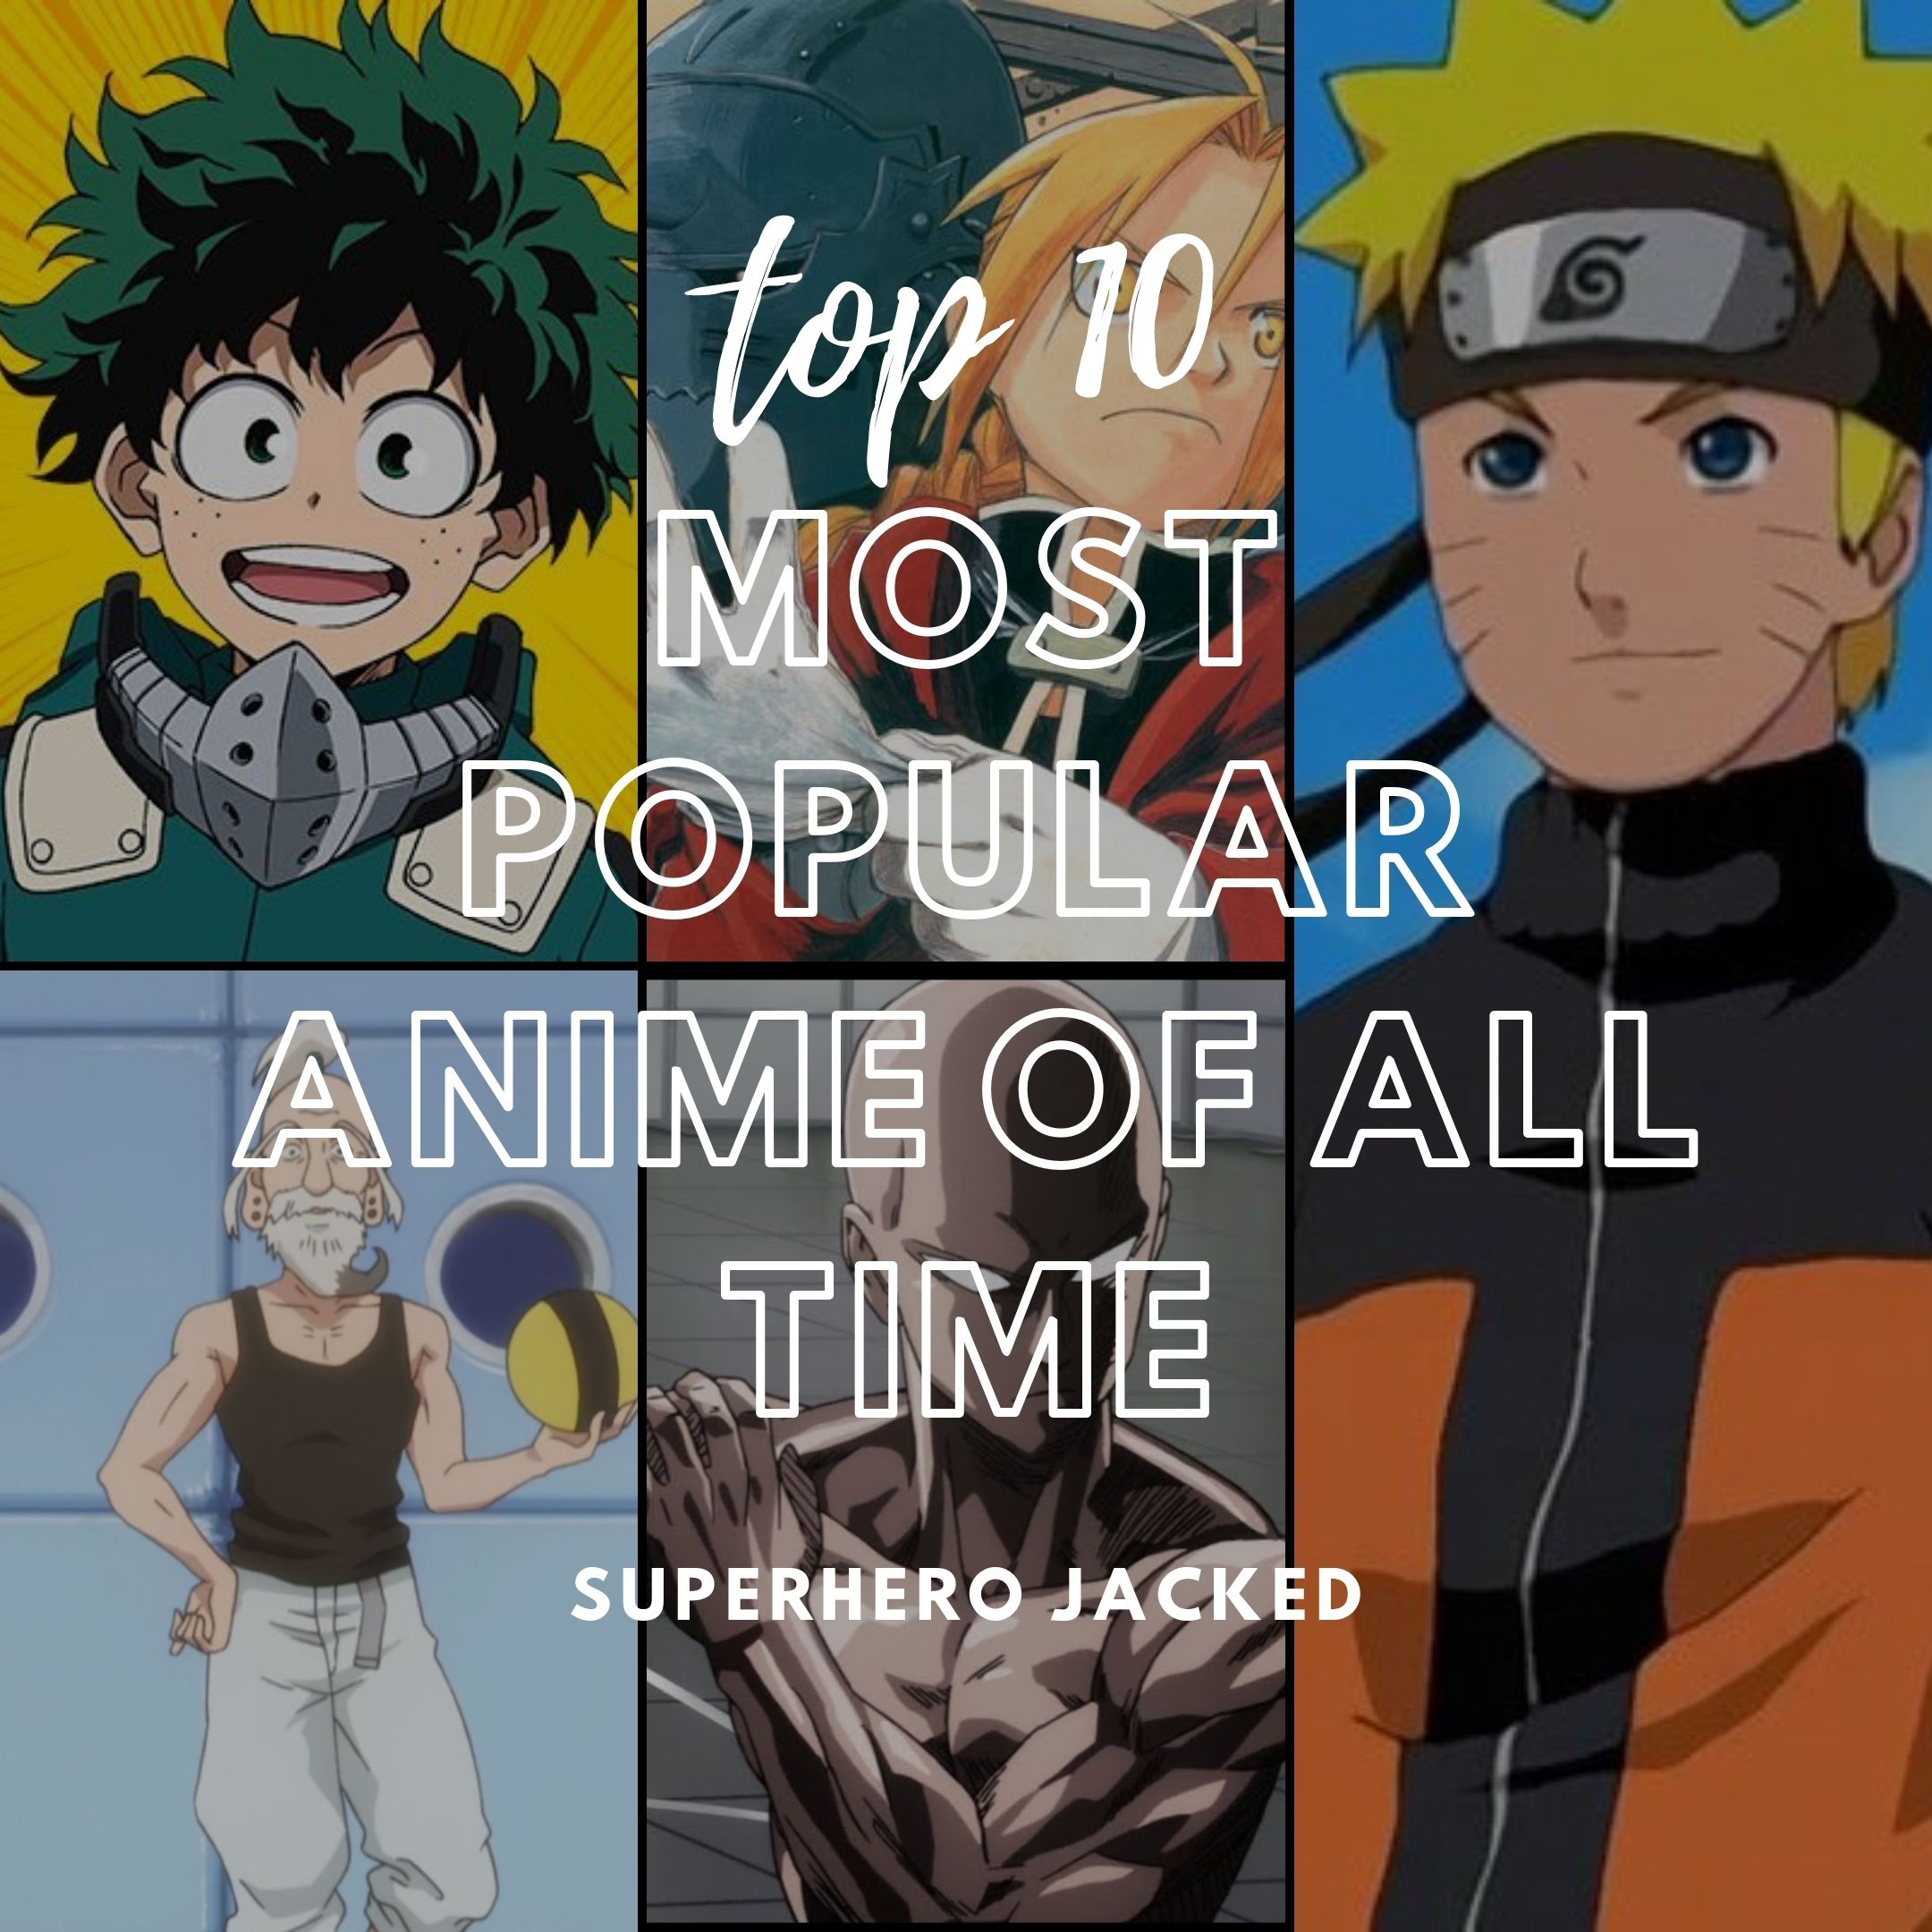 Top 10 Most Popular Anime Of All Time – Superhero Jacked